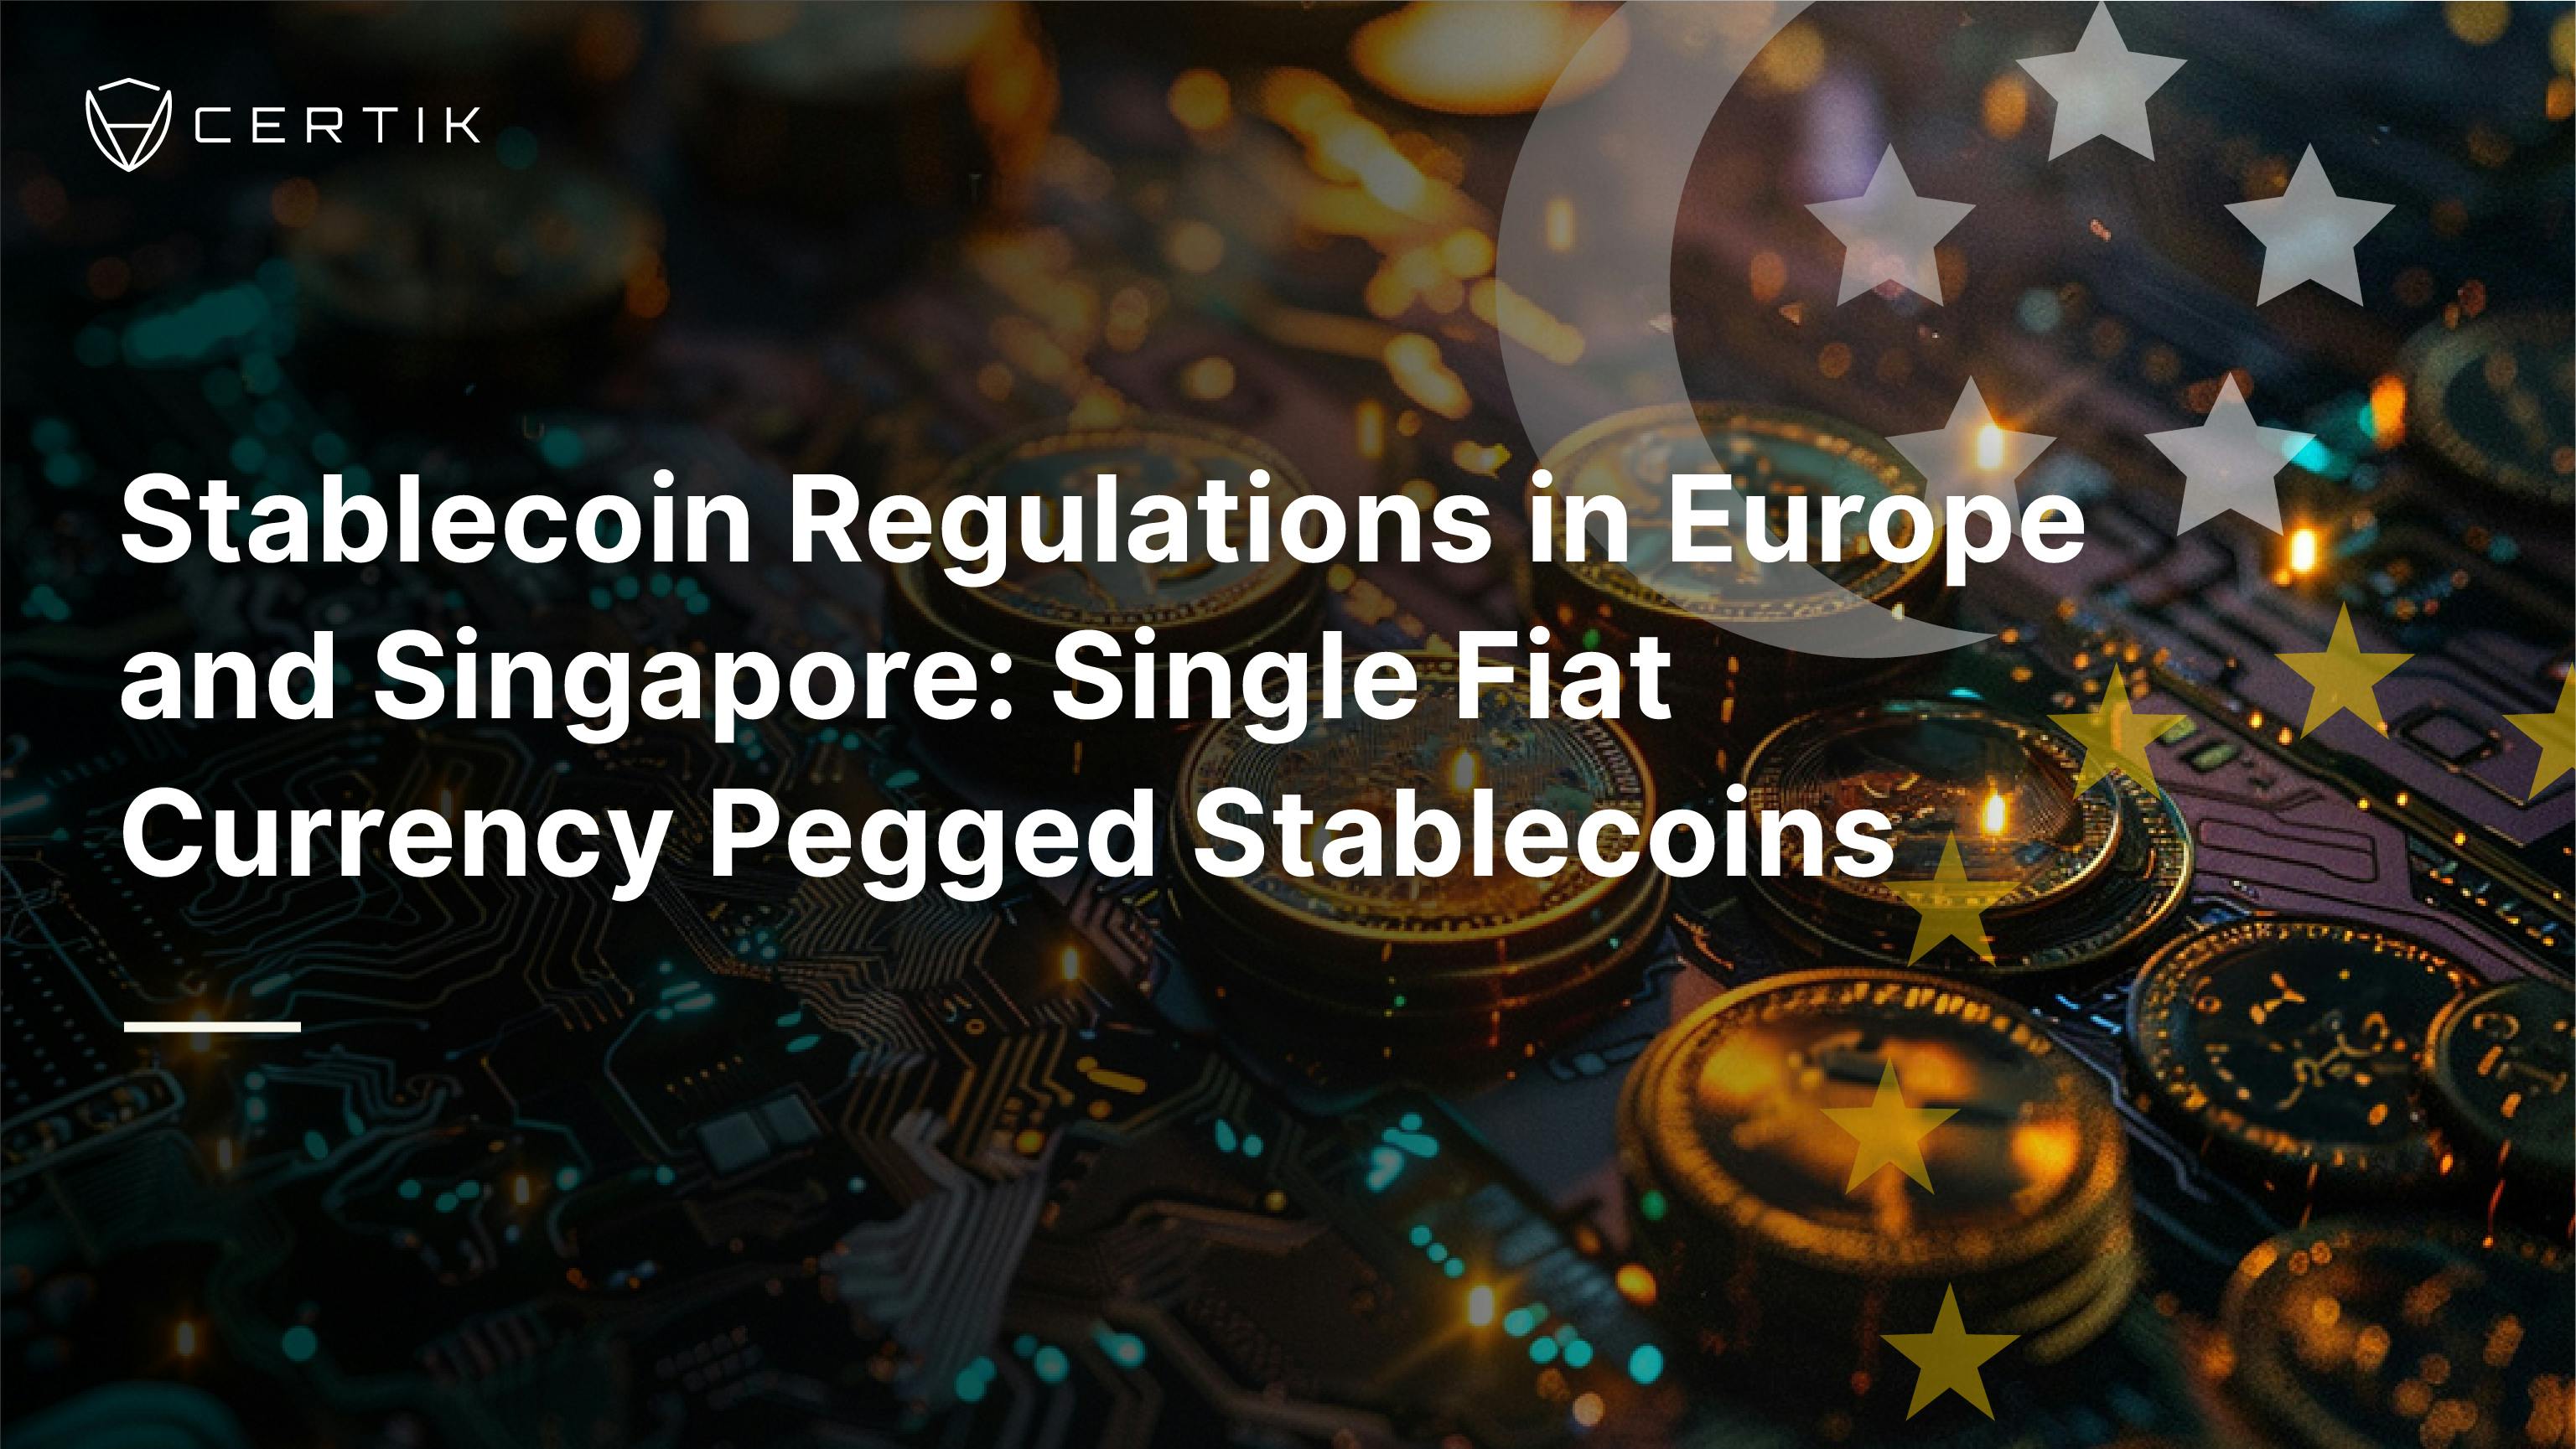 Stablecoin Regulations in Europe and Singapore: Single Fiat Currency Pegged Stablecoins